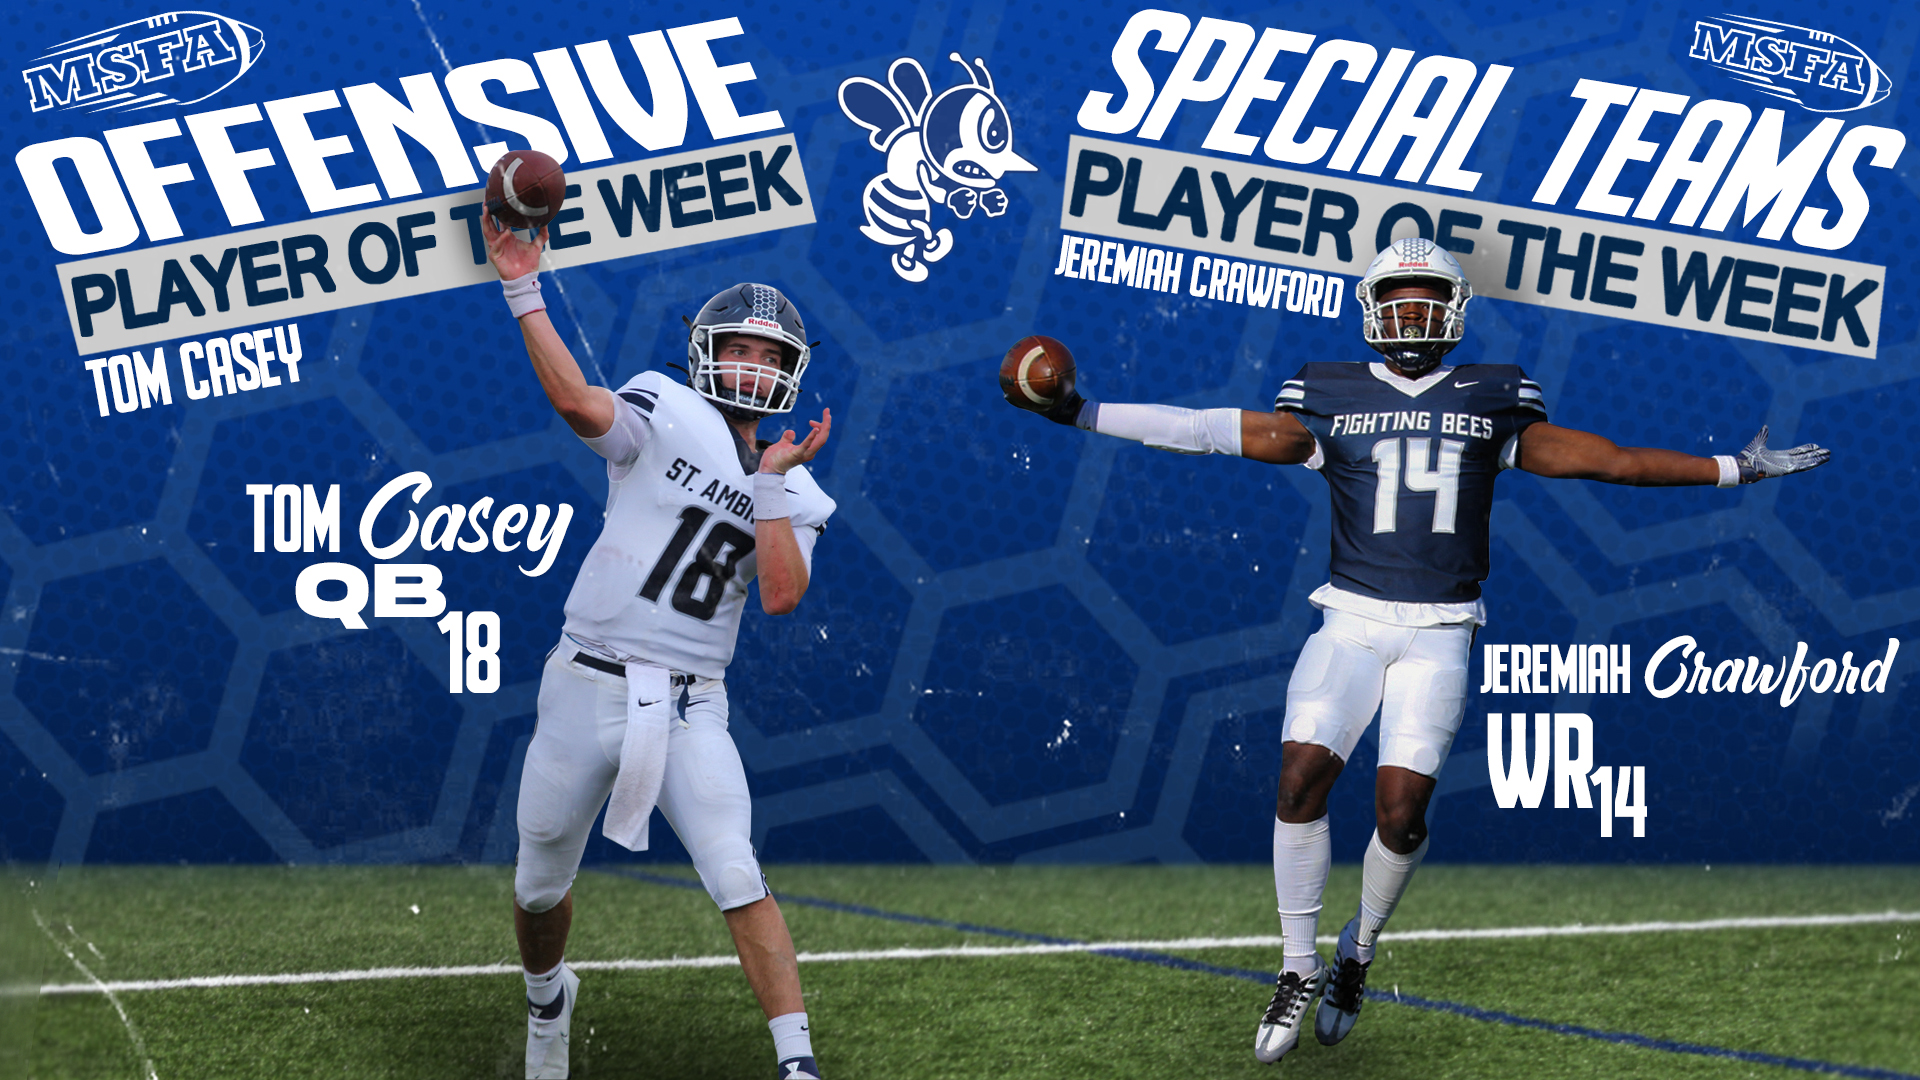 Casey, Crawford named MSFA Midwest League Players of the Week